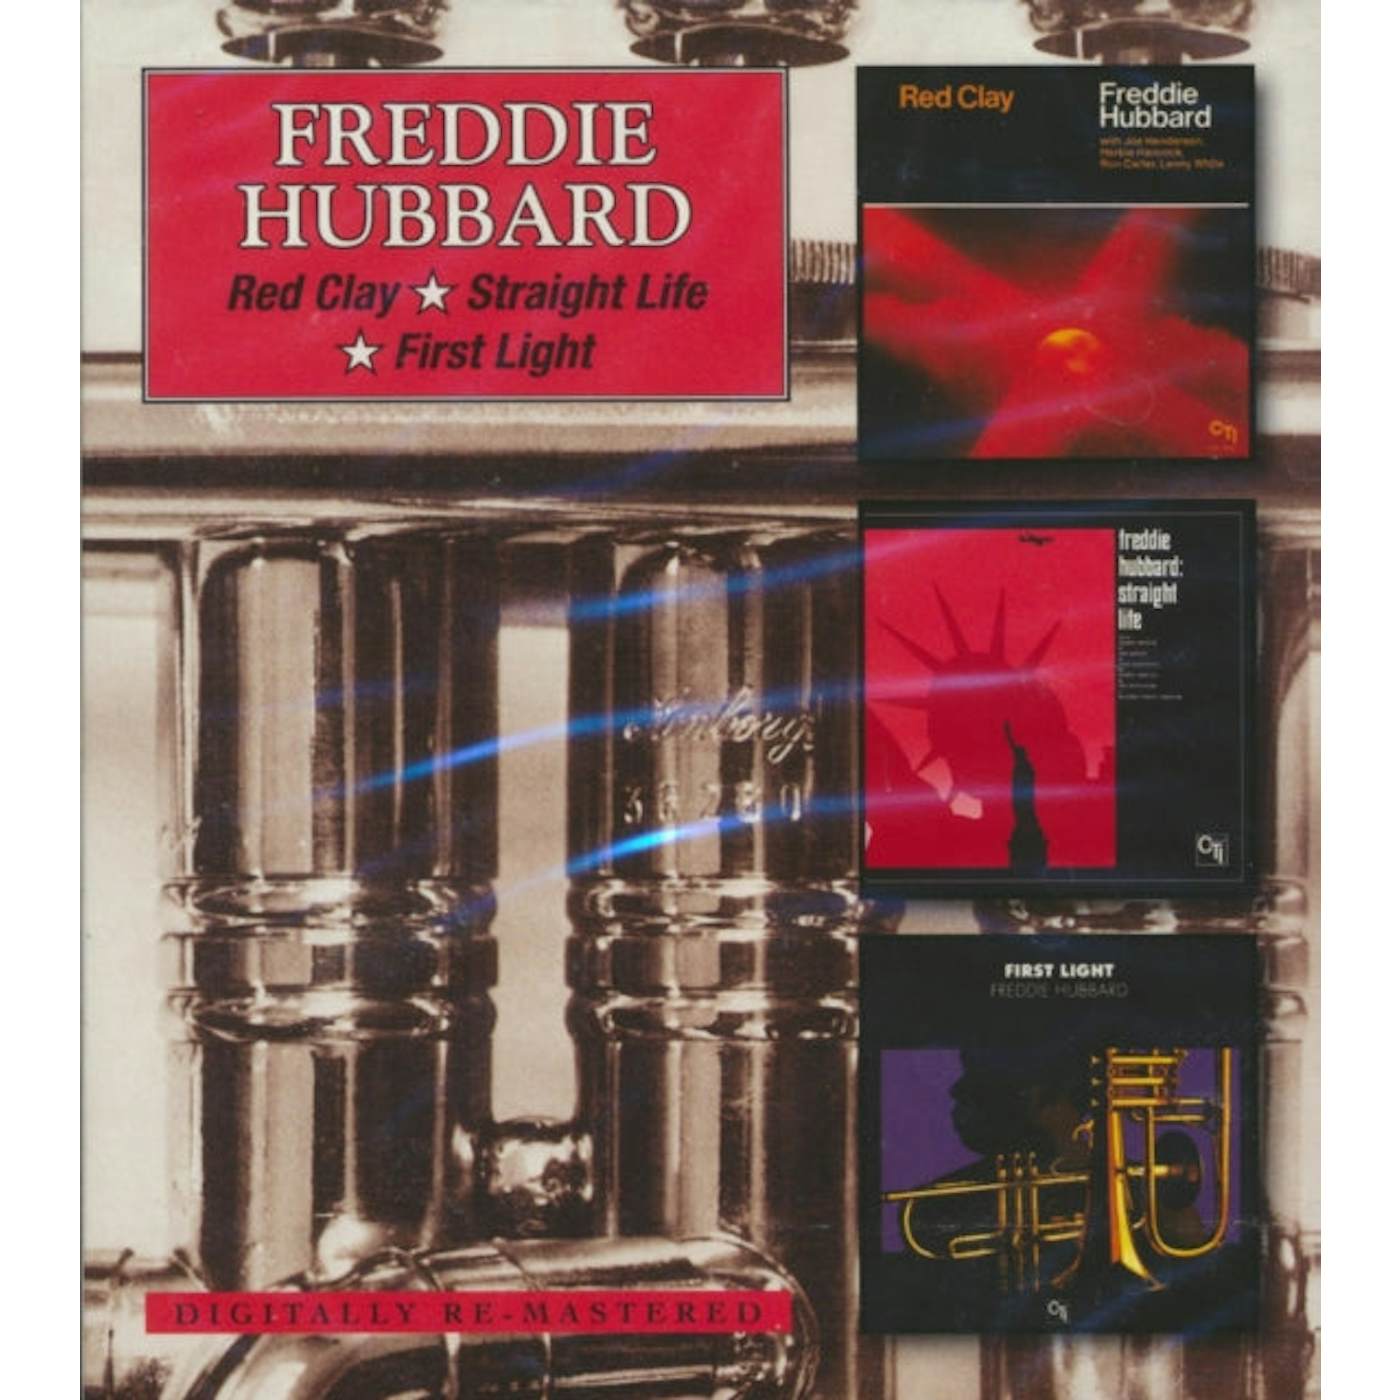 Freddie Hubbard CD - Red Clay / Straight Life / First